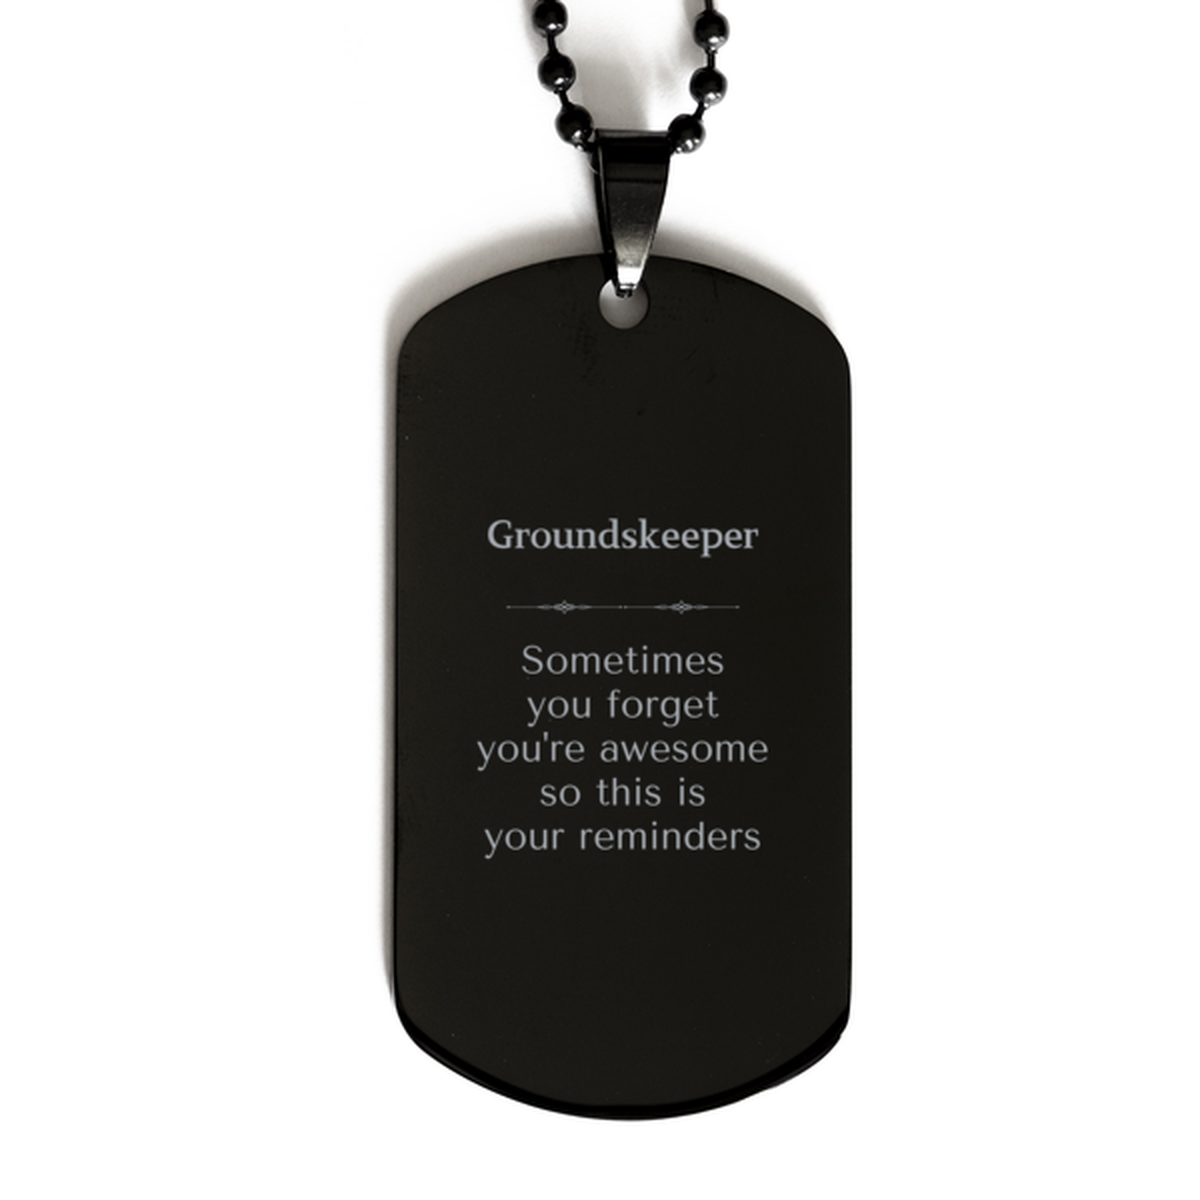 Sentimental Groundskeeper Black Dog Tag, Groundskeeper Sometimes you forget you're awesome so this is your reminders, Graduation Christmas Birthday Gifts for Groundskeeper, Men, Women, Coworkers